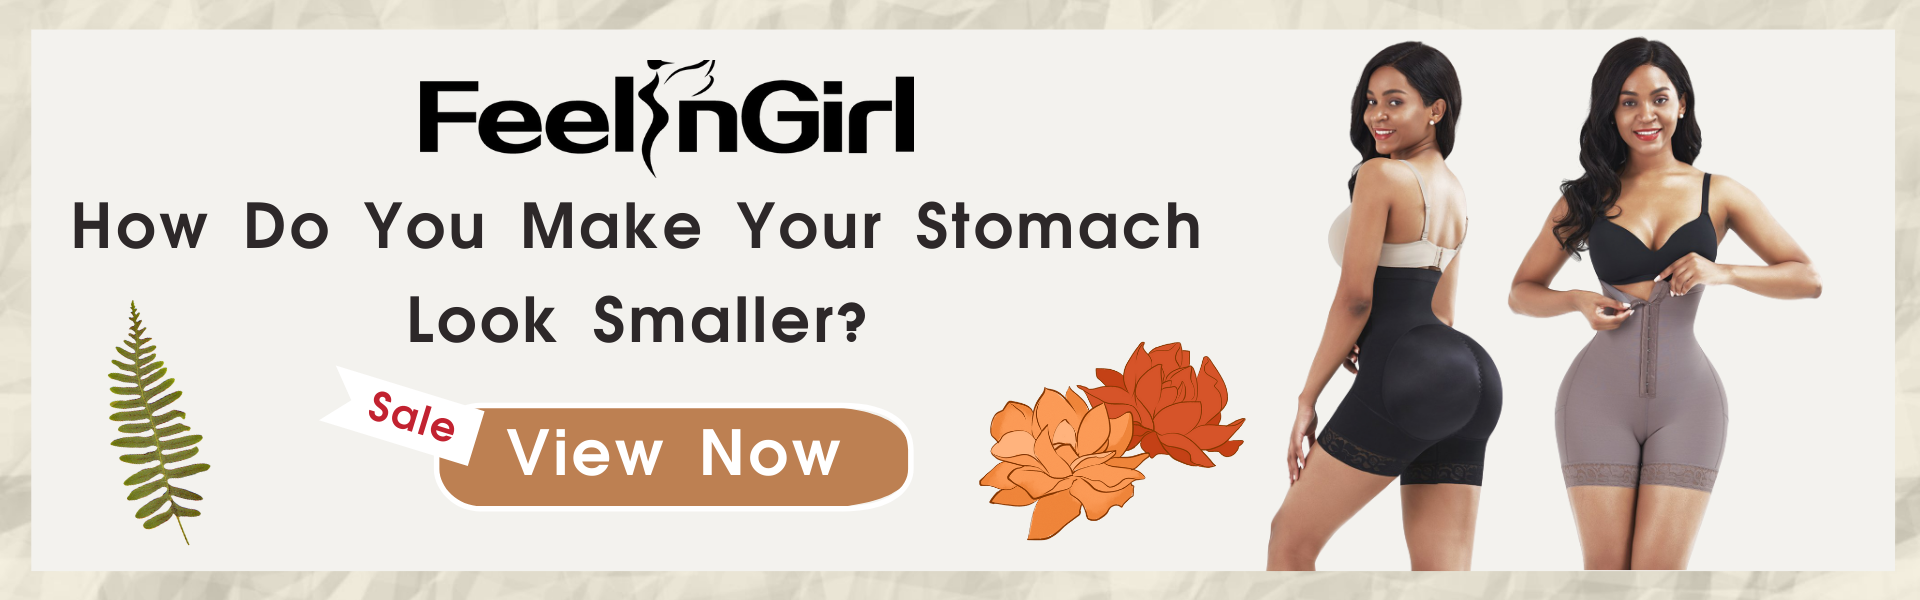 How Do You Make Your Stomach Look Smaller?